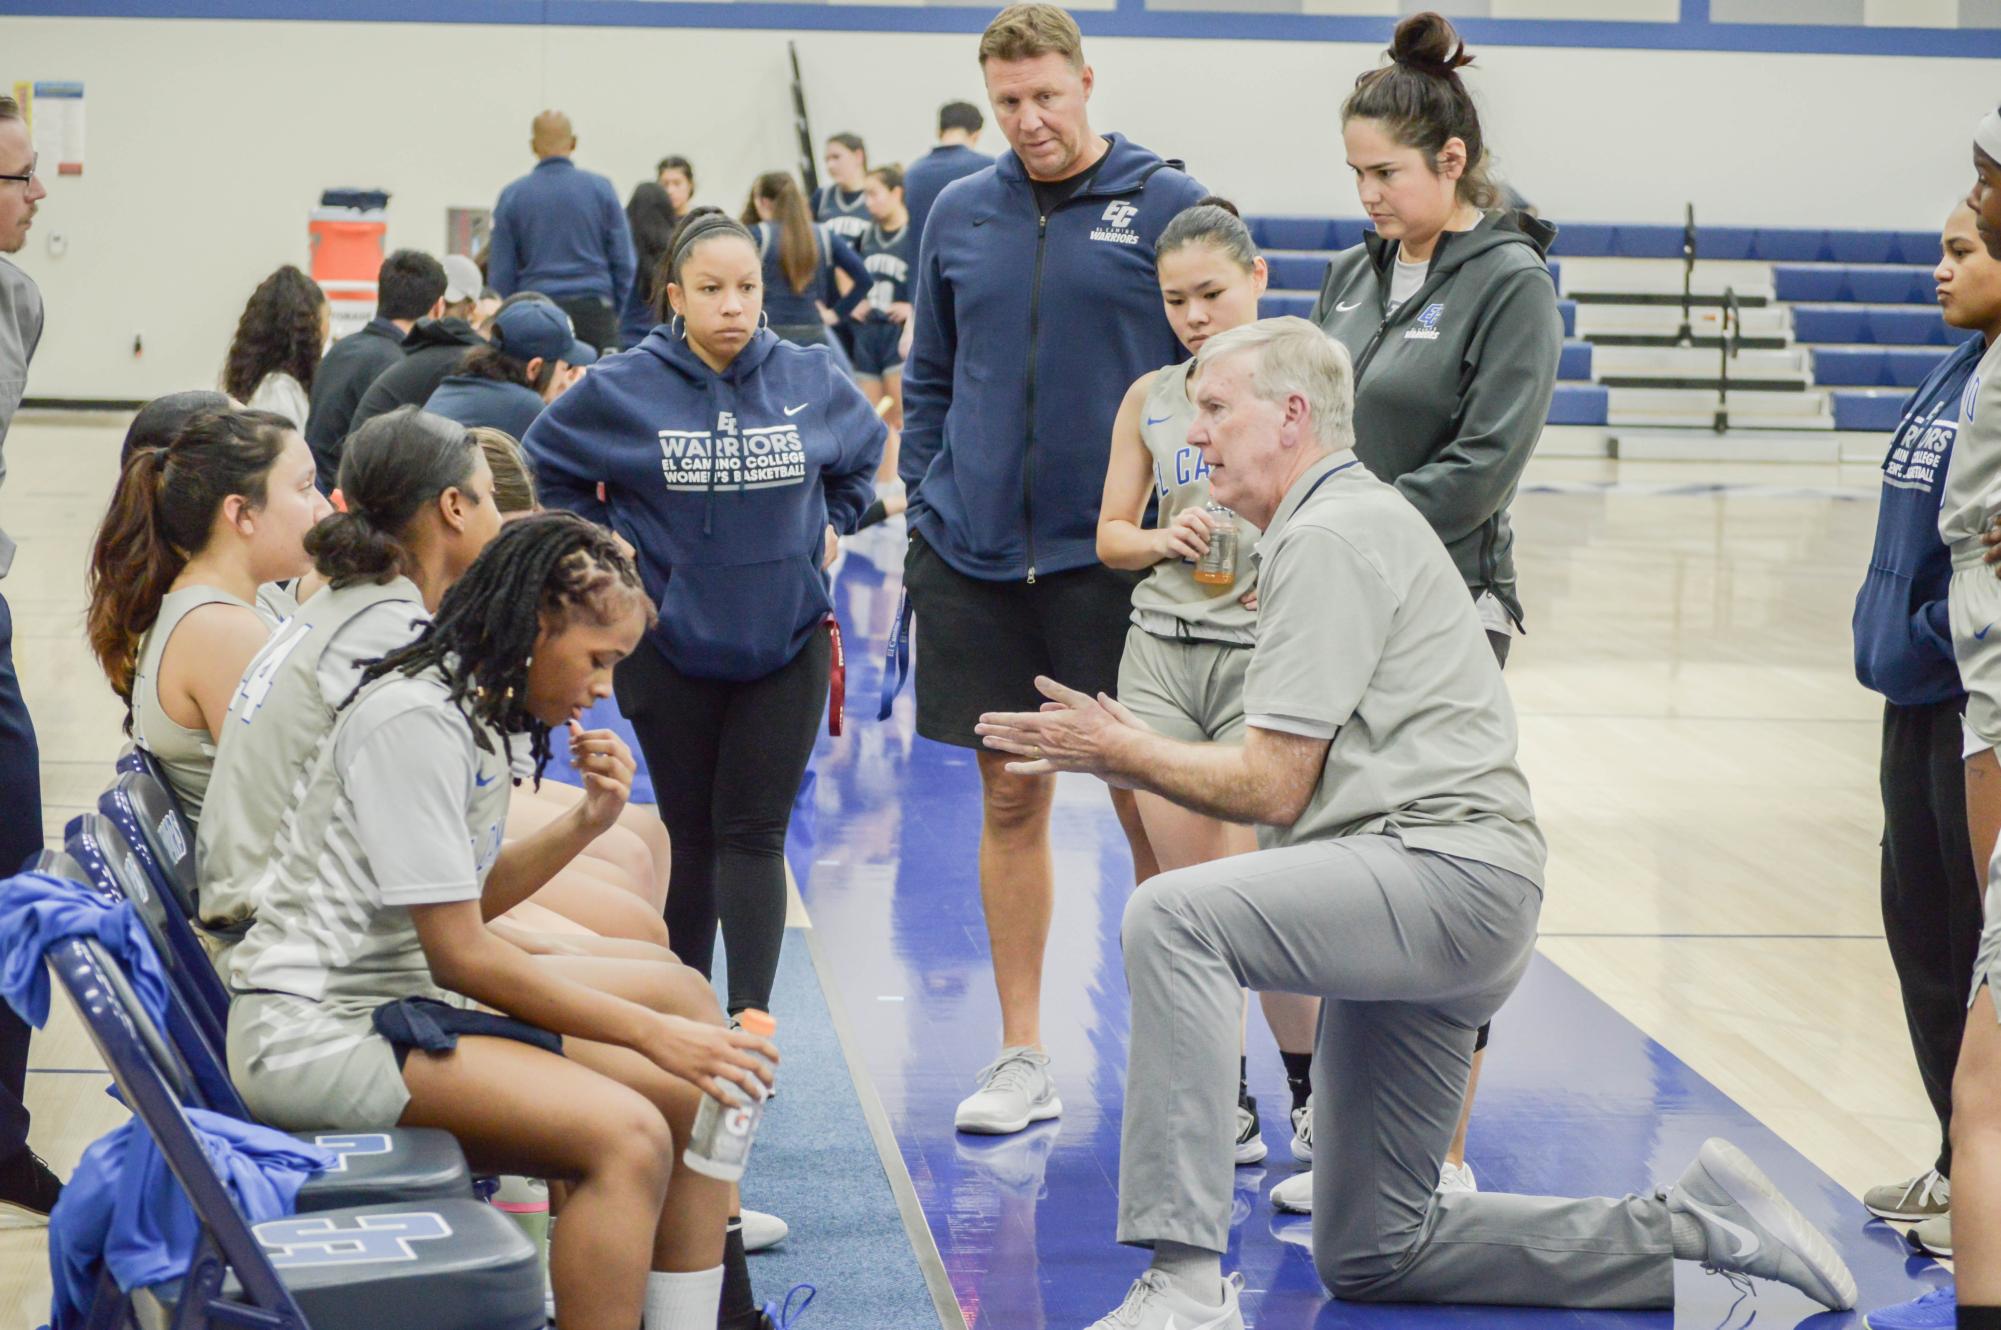 The Warriors coach attempts the galvanize the team as the competition locks down their offense in a game that had many challenges in their attempt to avoid defeat against the Irvine Valley Lasers.Nov.21. (Clarence Davis | The Union)